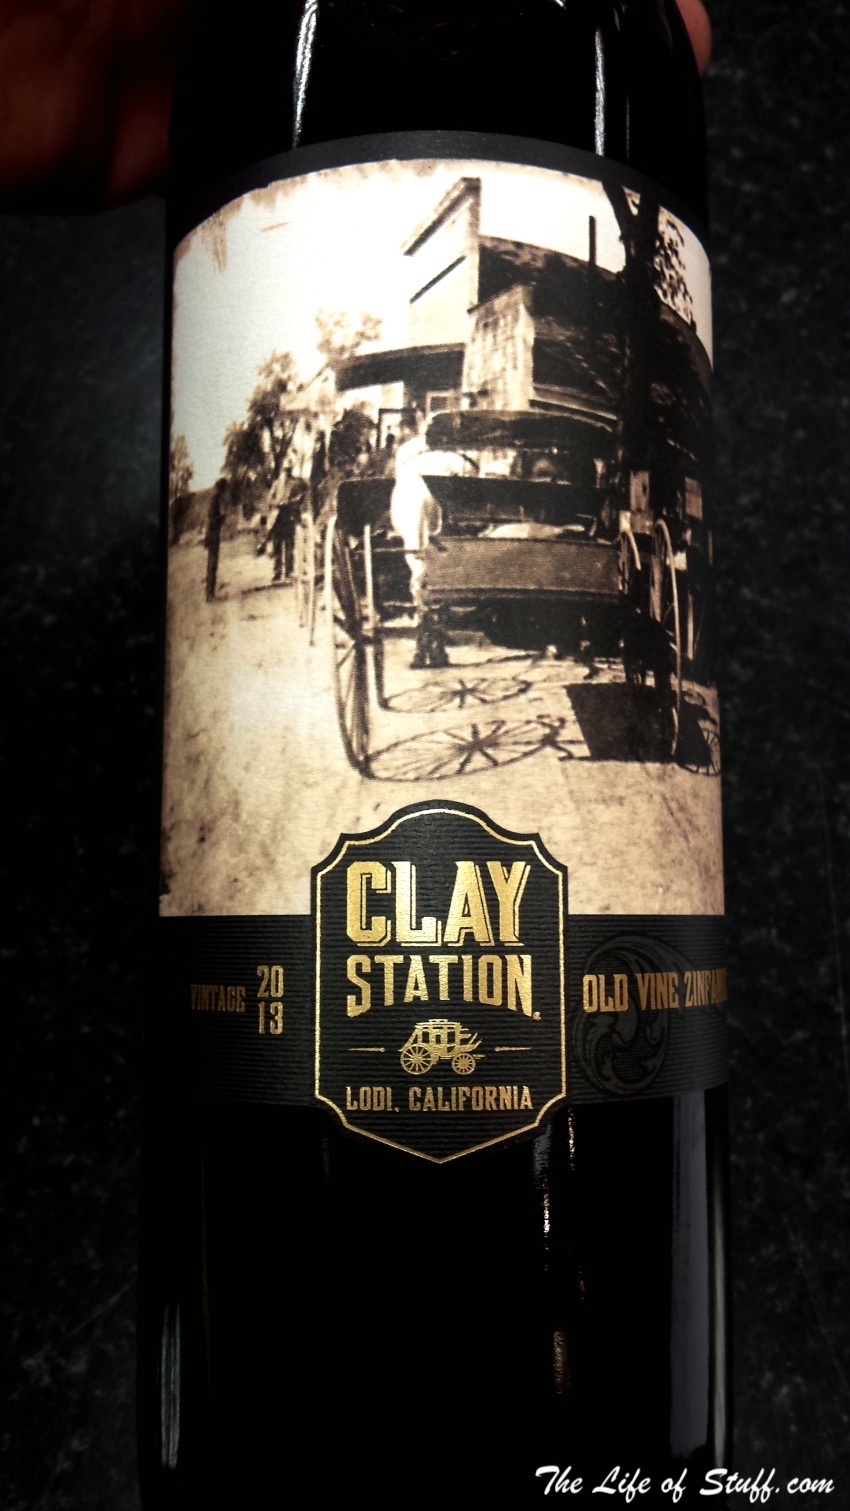 Bevvy of the Week - Clay Station, Lodi California - Old Vine Zinfandel